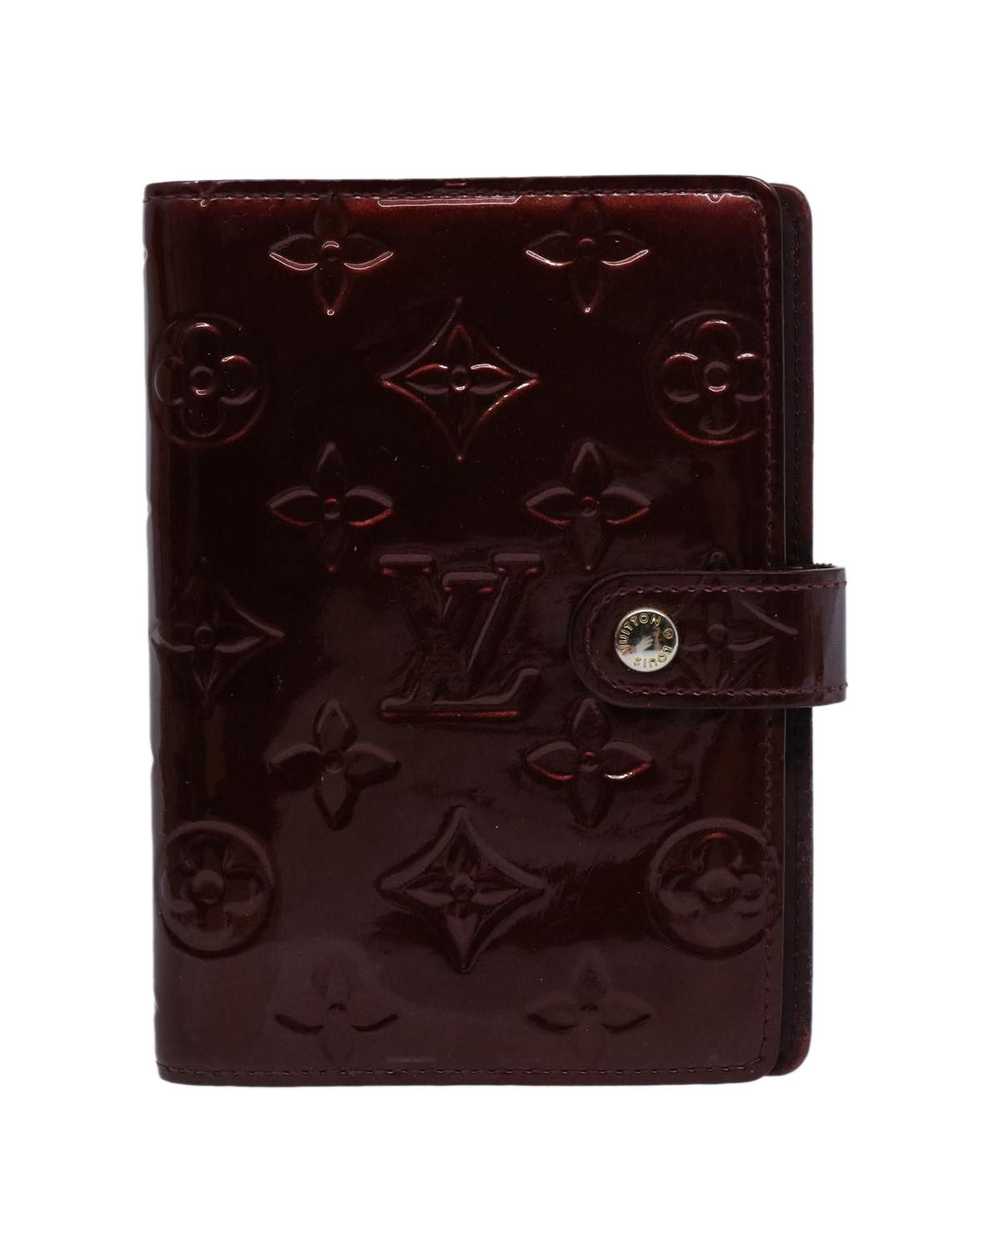 Louis Vuitton Burgundy Patent Leather Diary Cover - image 2